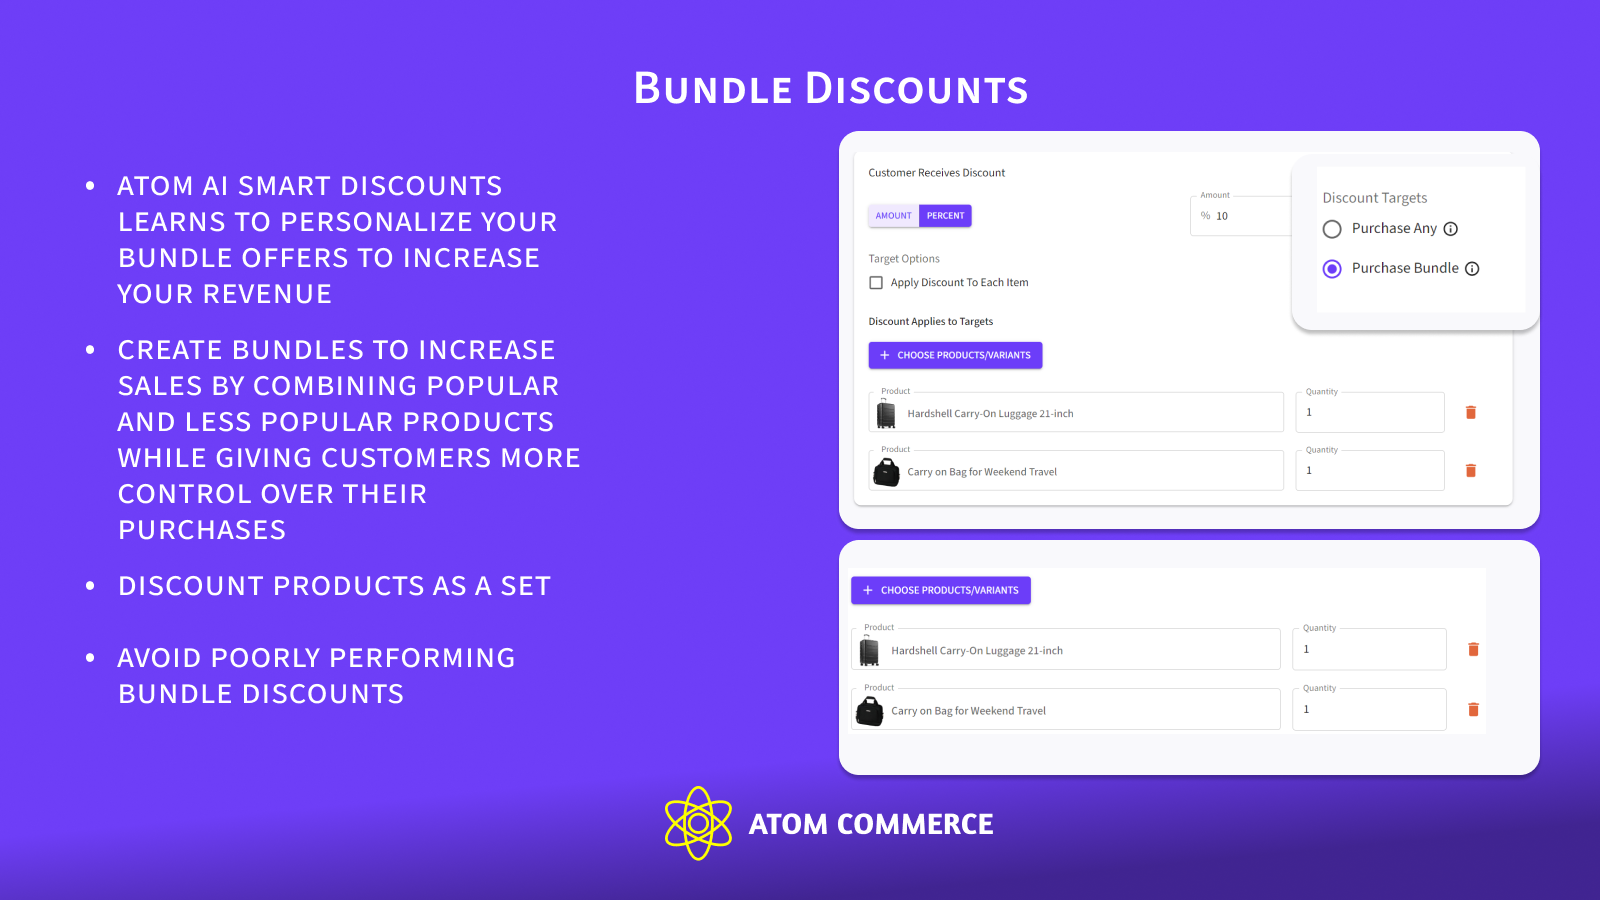 Smart personalized, bundle offers increase your revenue